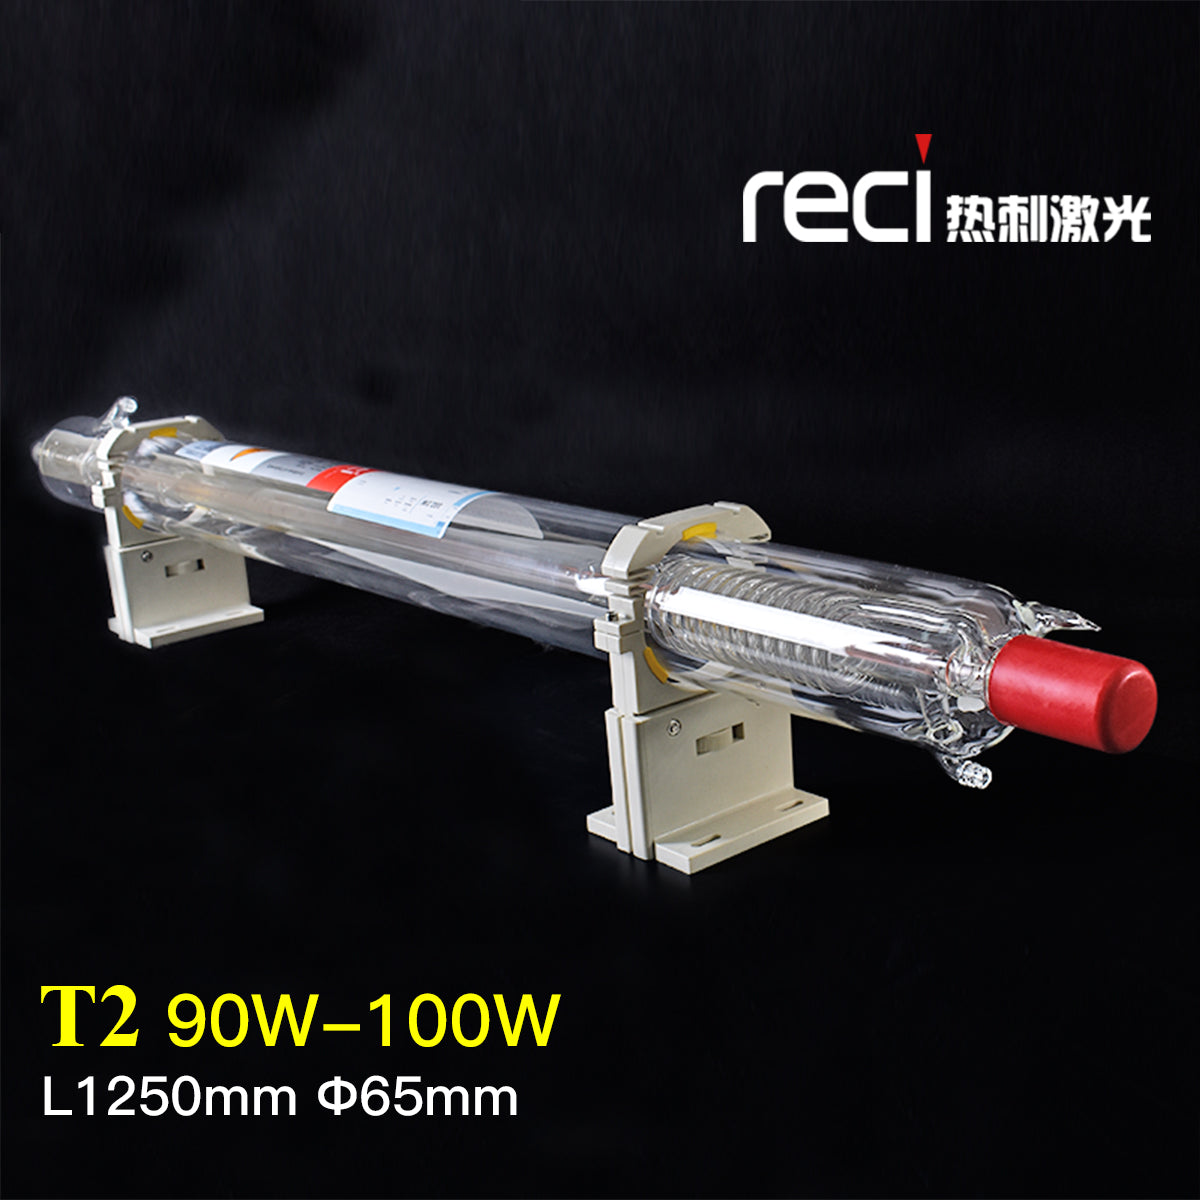 New T2 Reci W2 V2 90W CO2 Laser Tube 80W 100W D65 Wooden Box Packing For CO2 Laser Cutting Machine Lamp Engraving Equipment Pipe